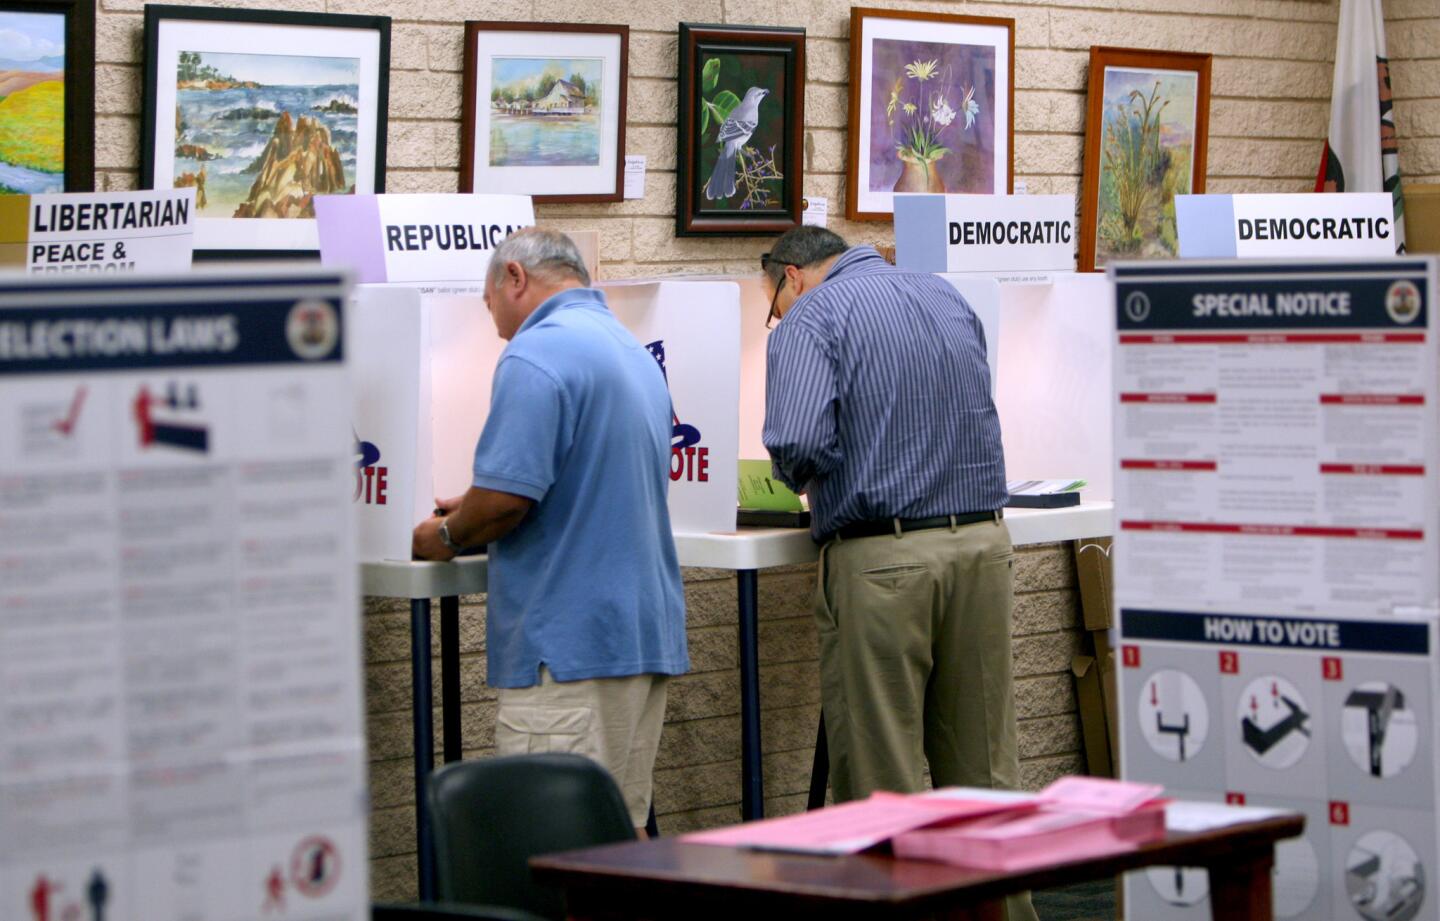 With walls full of colorful art, voters cast their ballots at the La Cañada Flintridge Library, in La Cañada Flintridge on Tuesday, June 7, 2016.